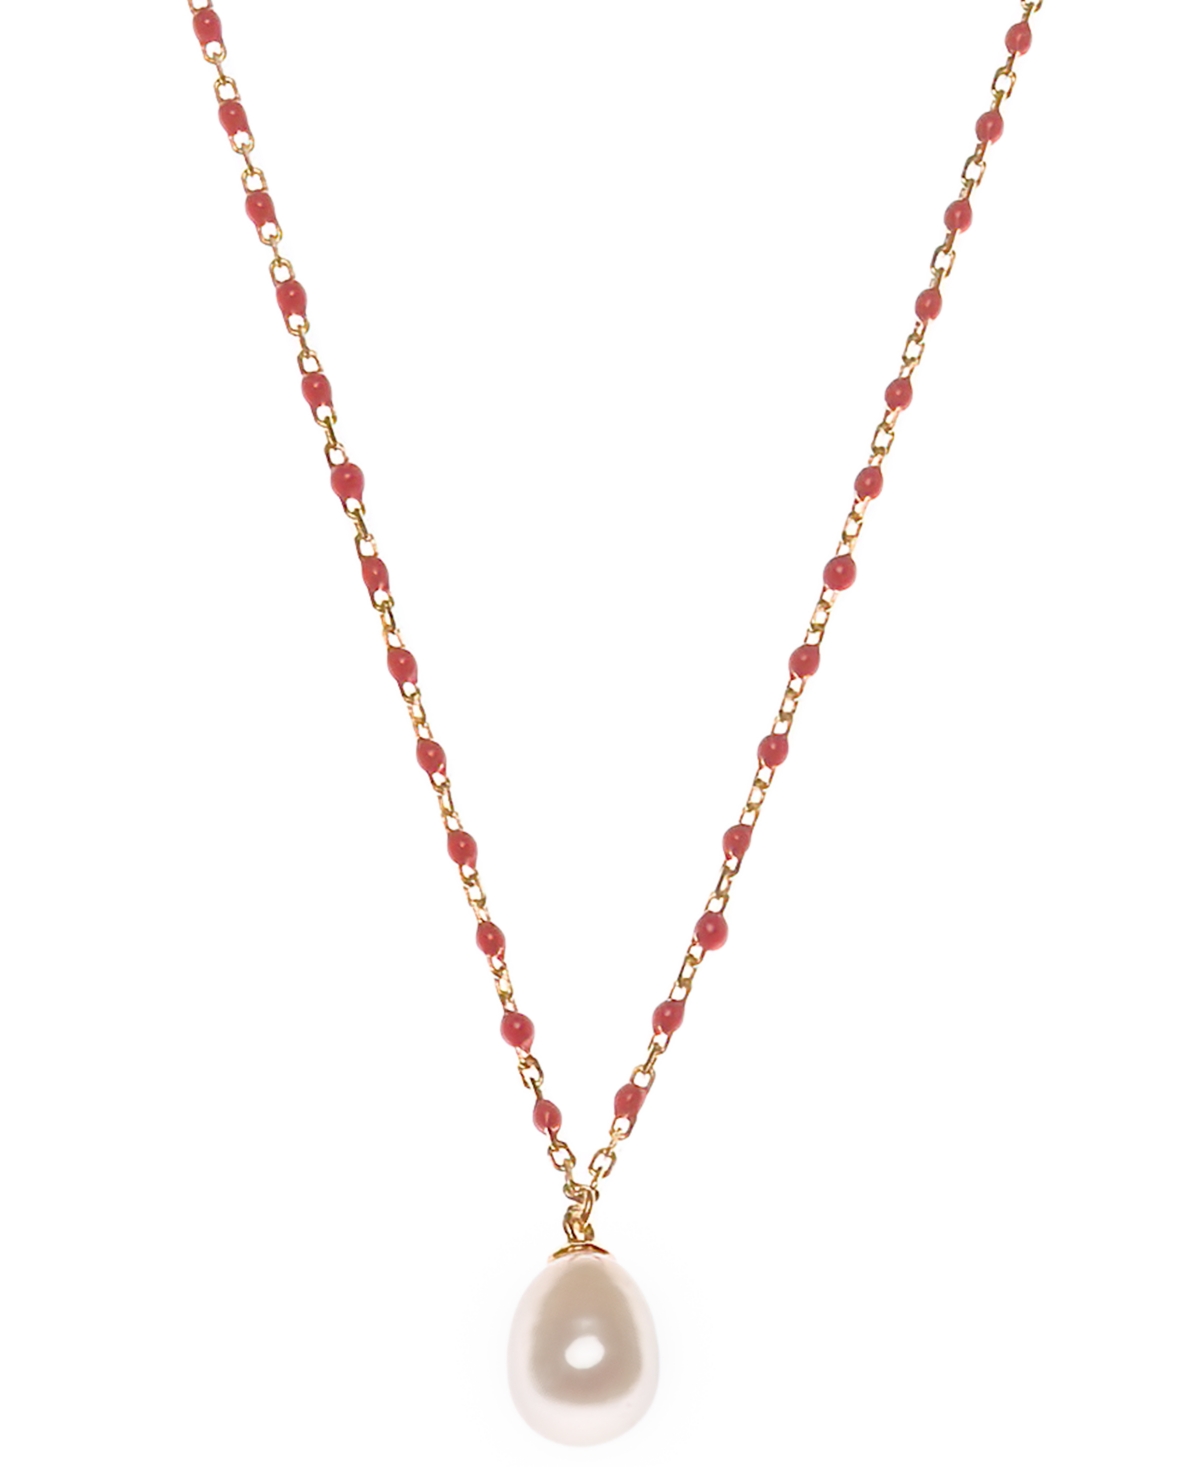 MACY'S CULTURED FRESHWATER PEARL (6 X 8MM) & ENAMEL BEAD PENDANT NECKLACE IN 18K GOLD-PLATED STERLING SILVE